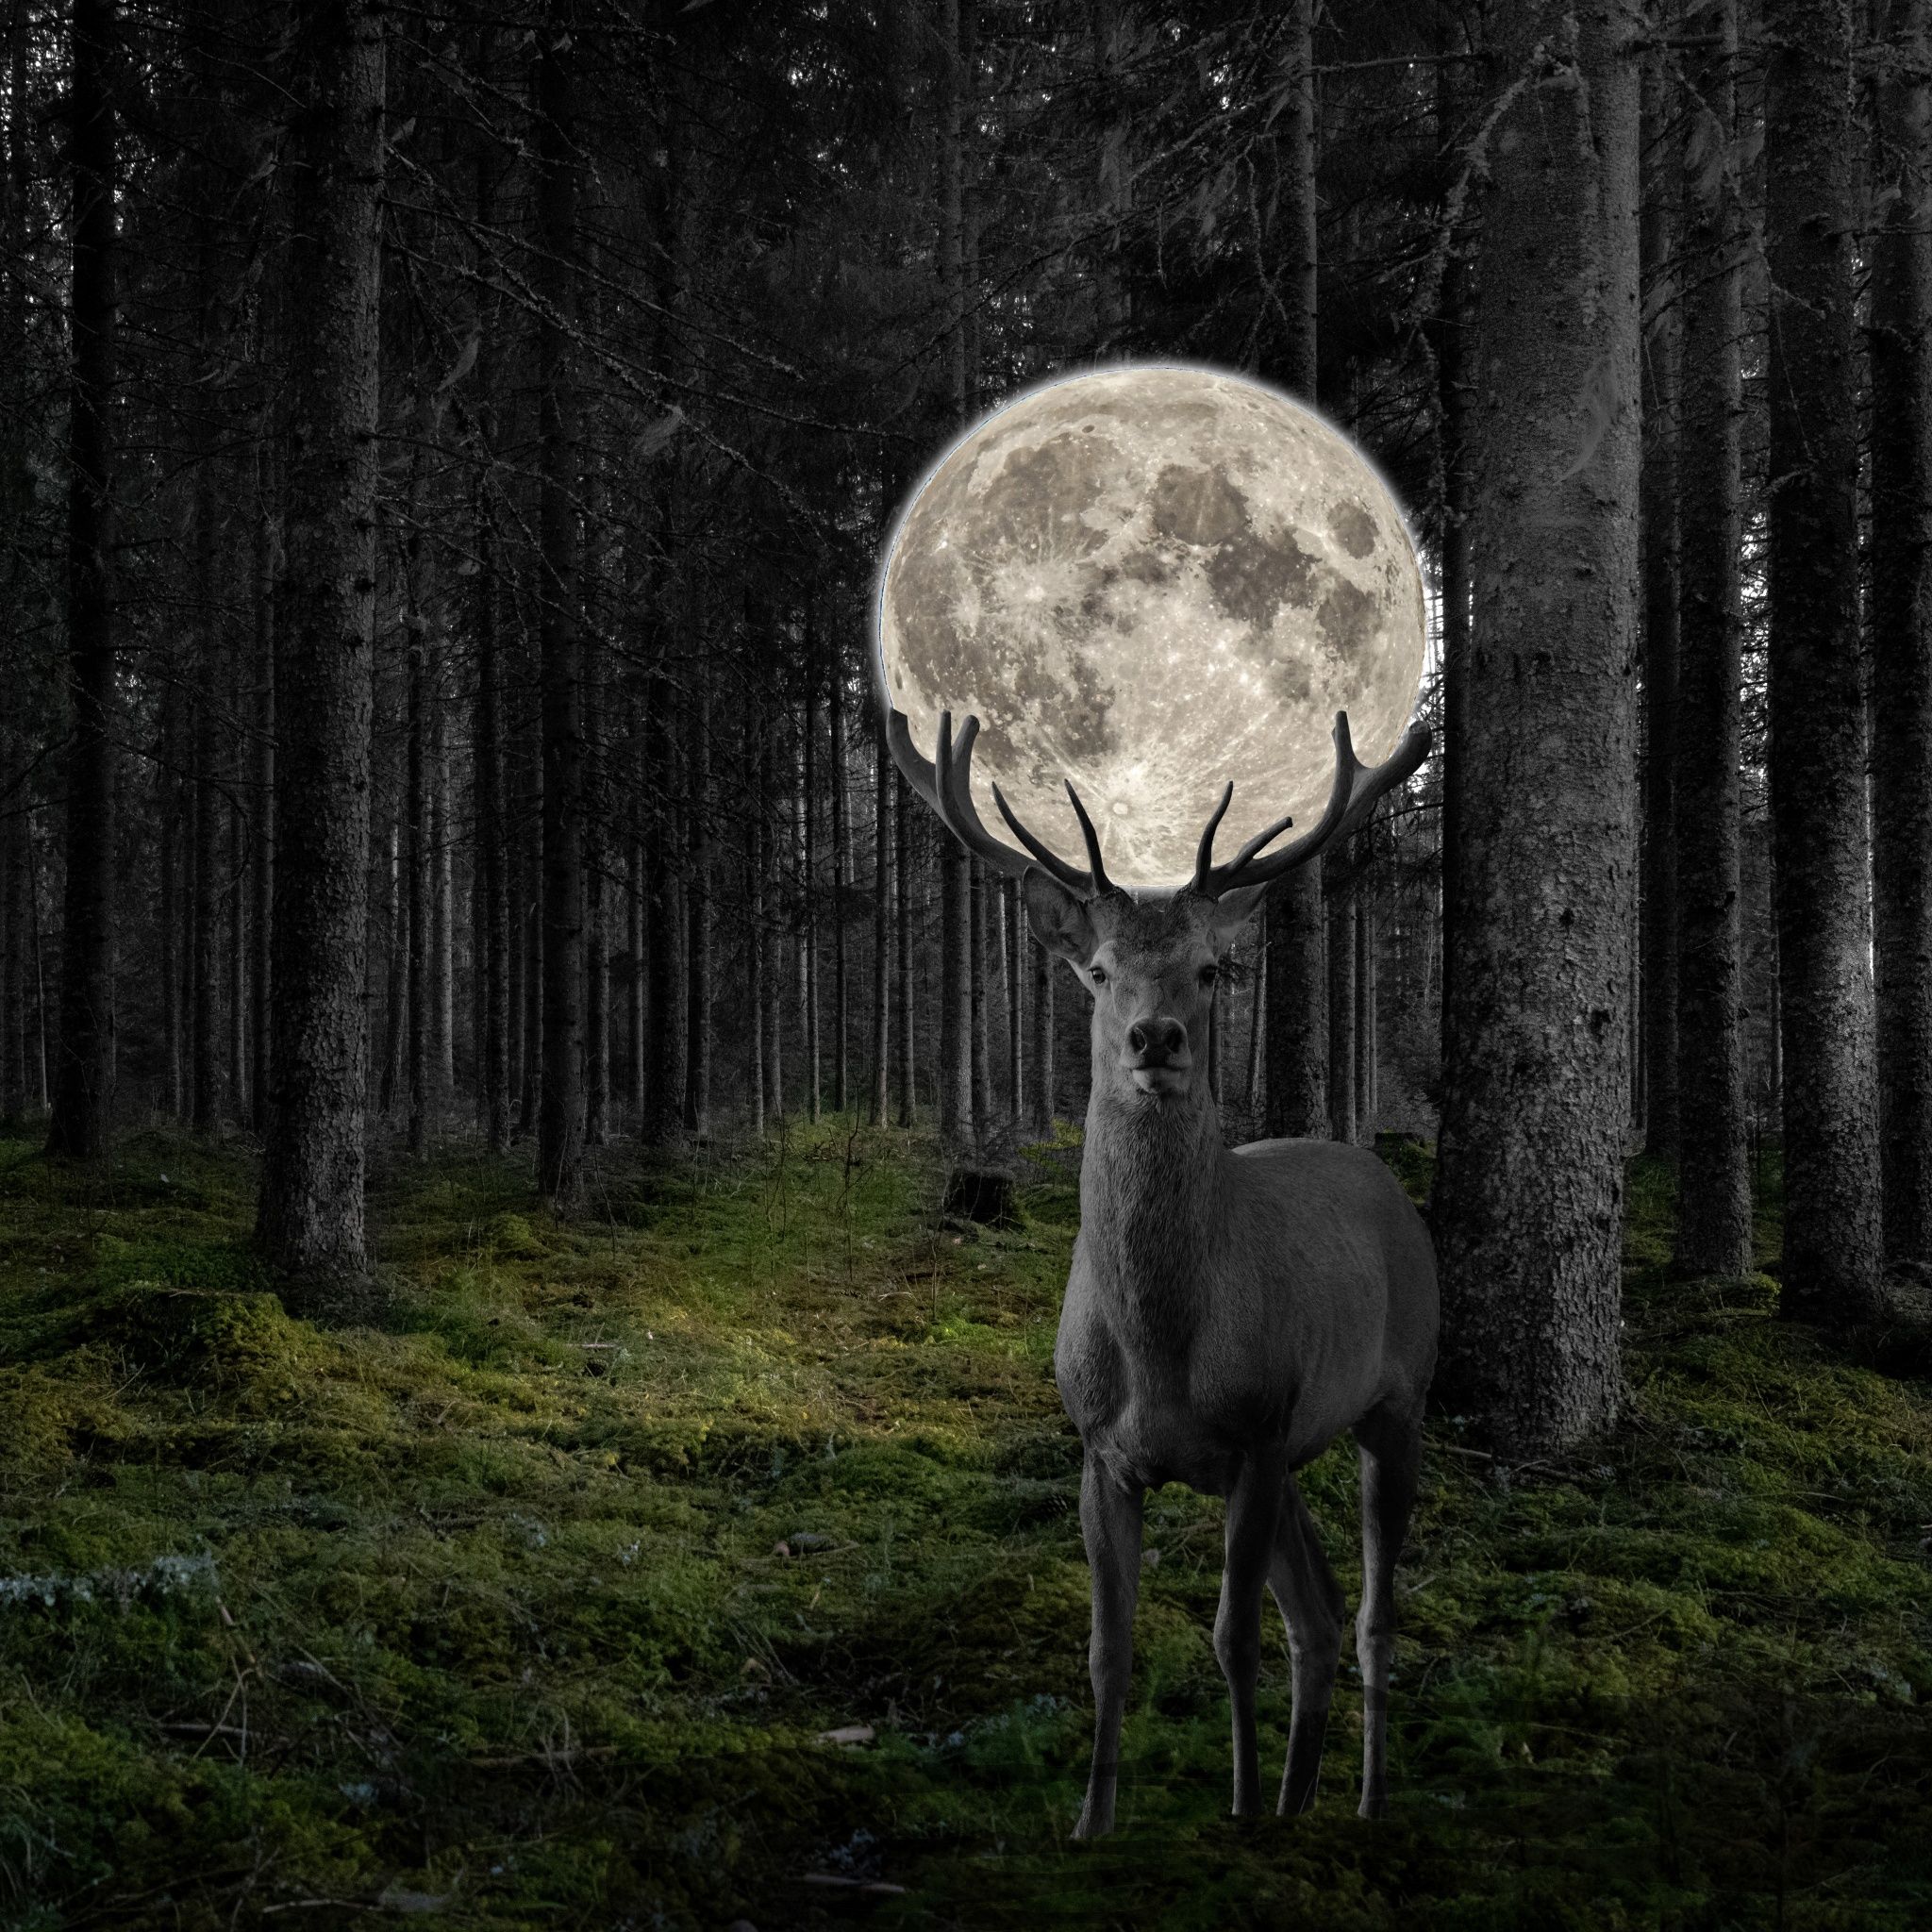 A deer with a full moon for a head. - Deer